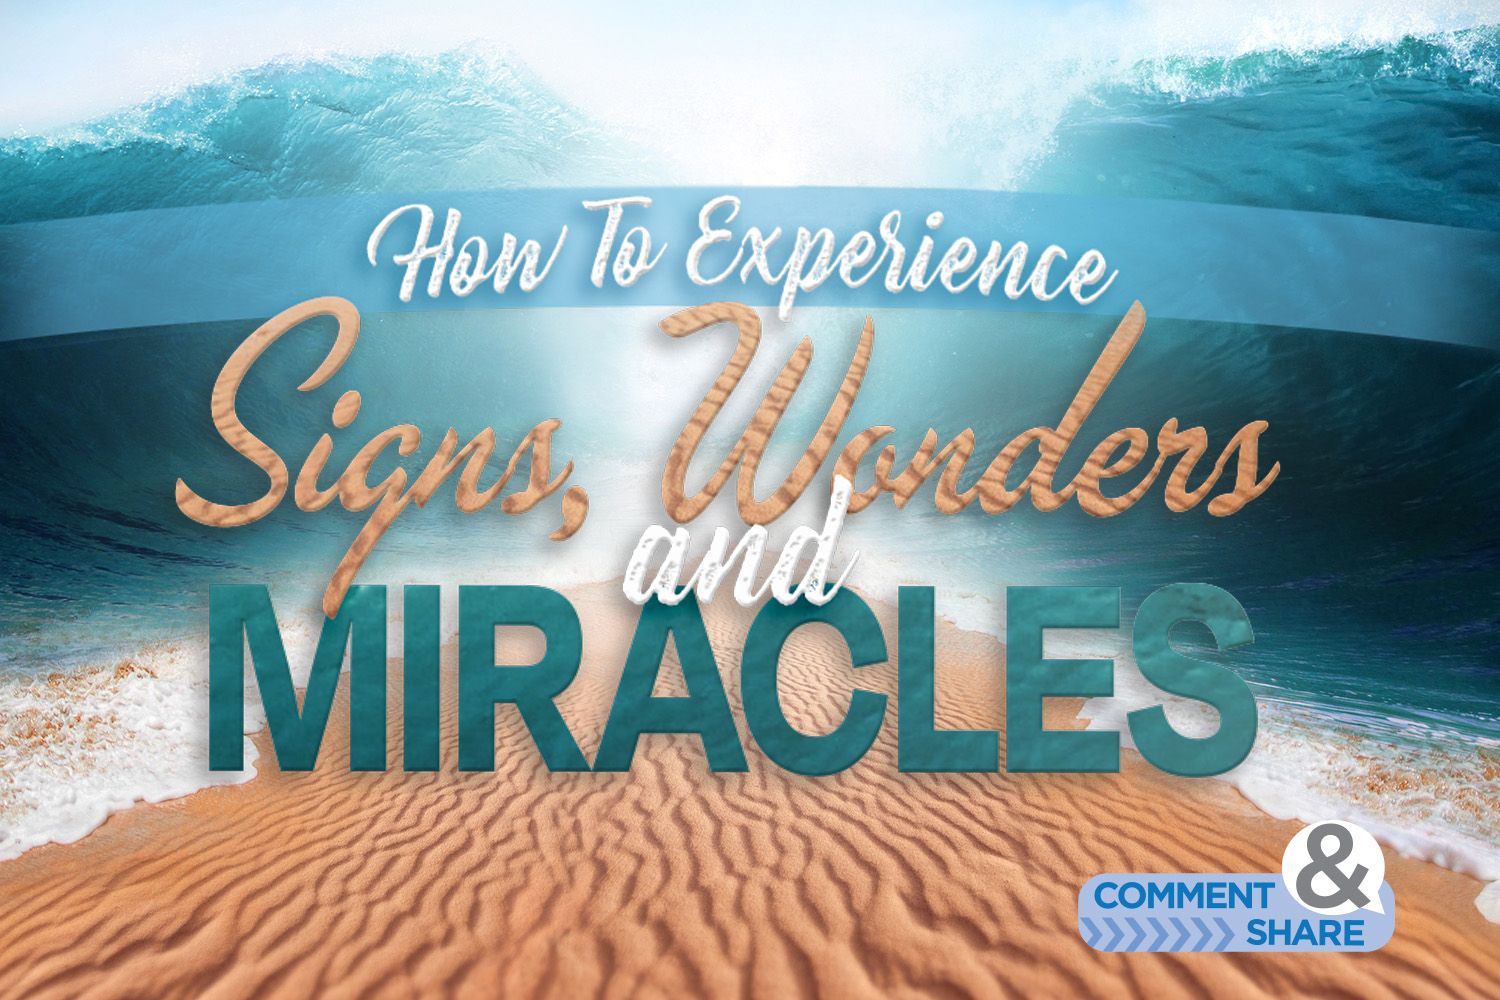 How To Experience Signs, Wonders, and Miracles